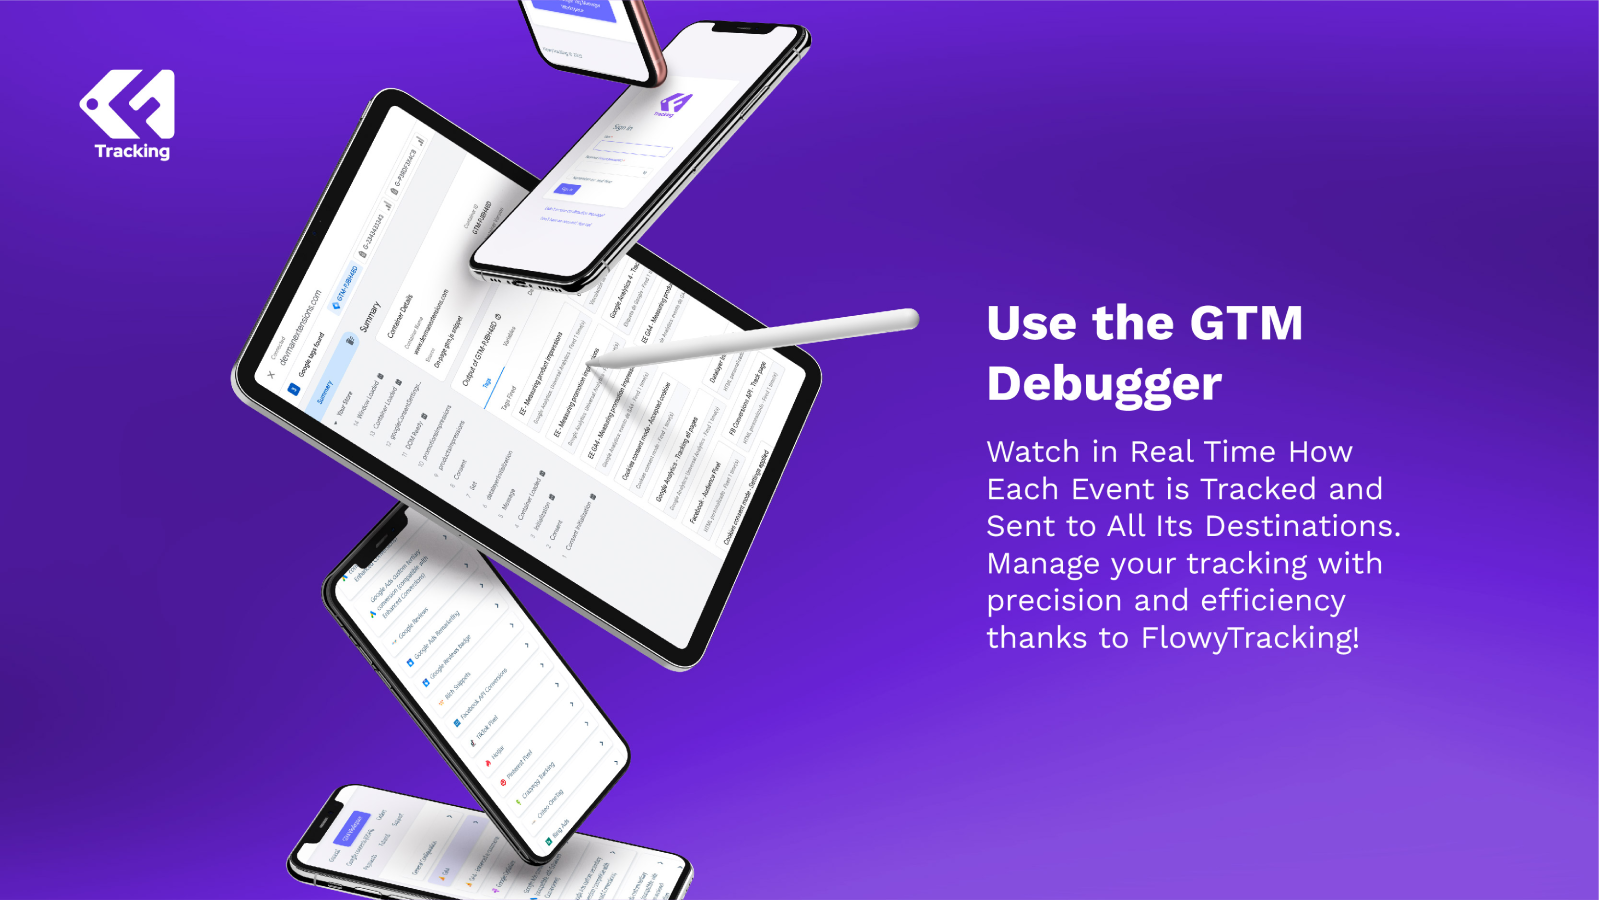 Use the GTM debugger